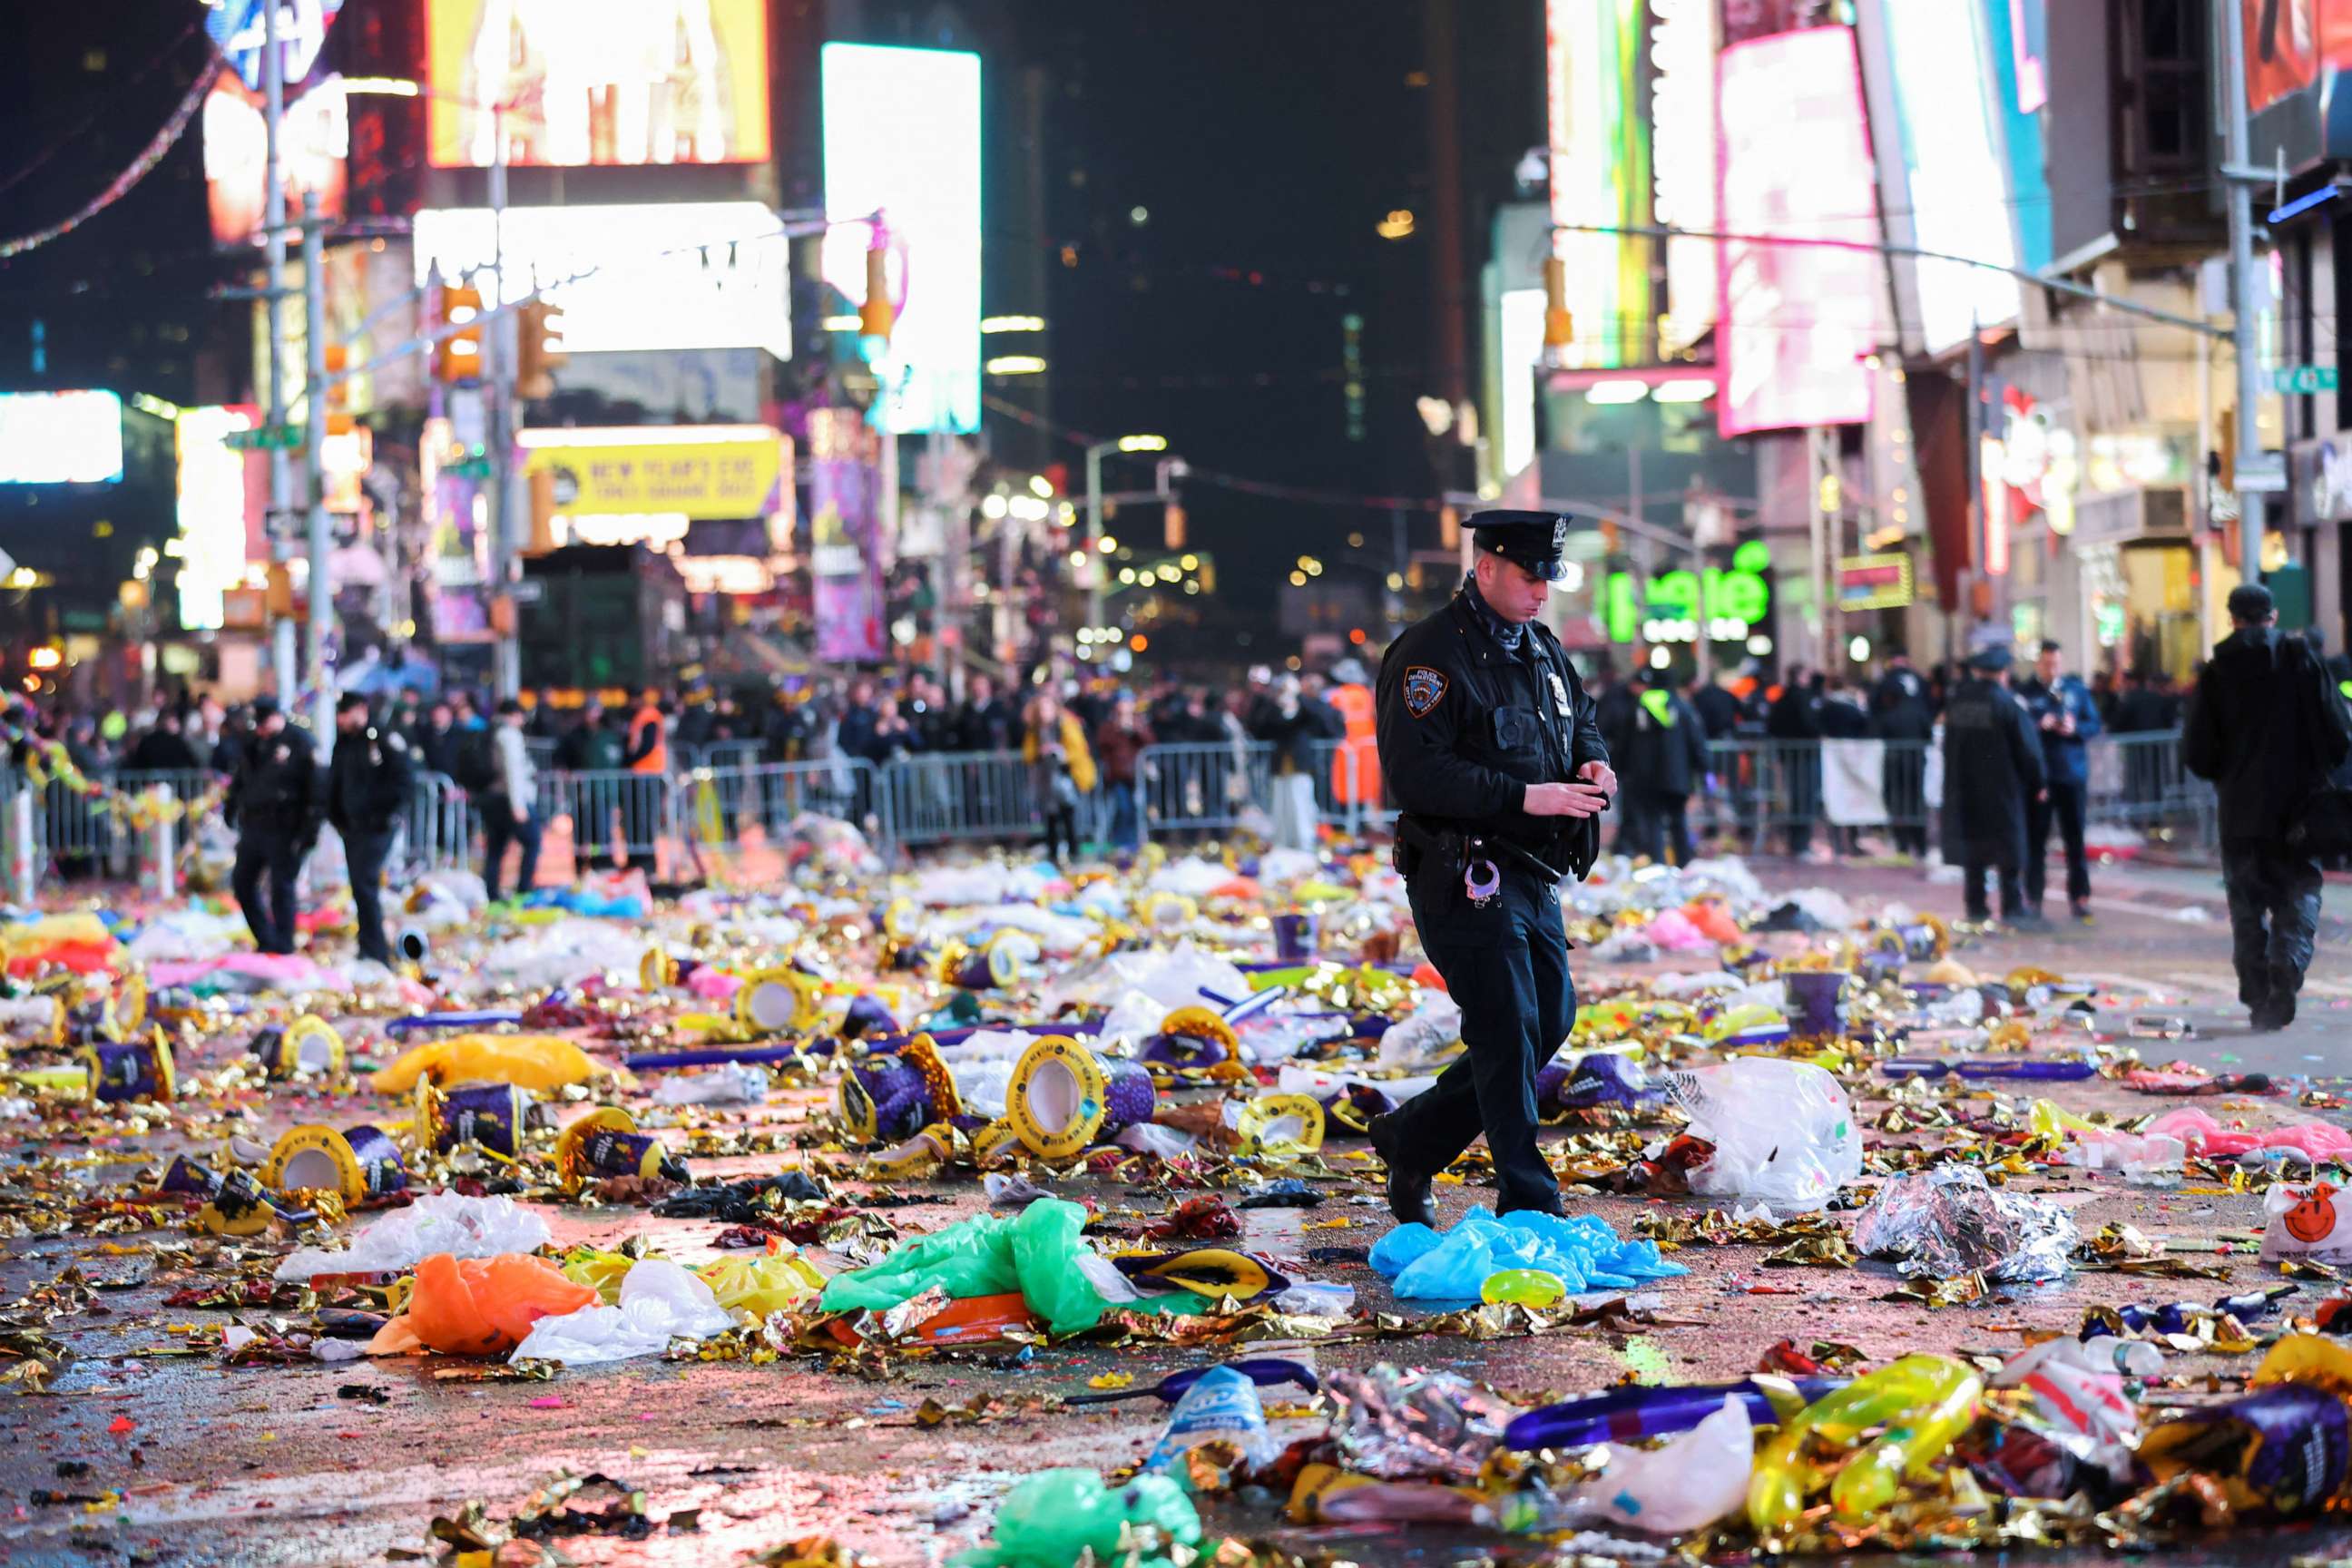 PHOTO: A police officer walks after the first public New Year's event since the COVID-19 pandemic, at Times Square, in New York, Jan. 1, 2023.